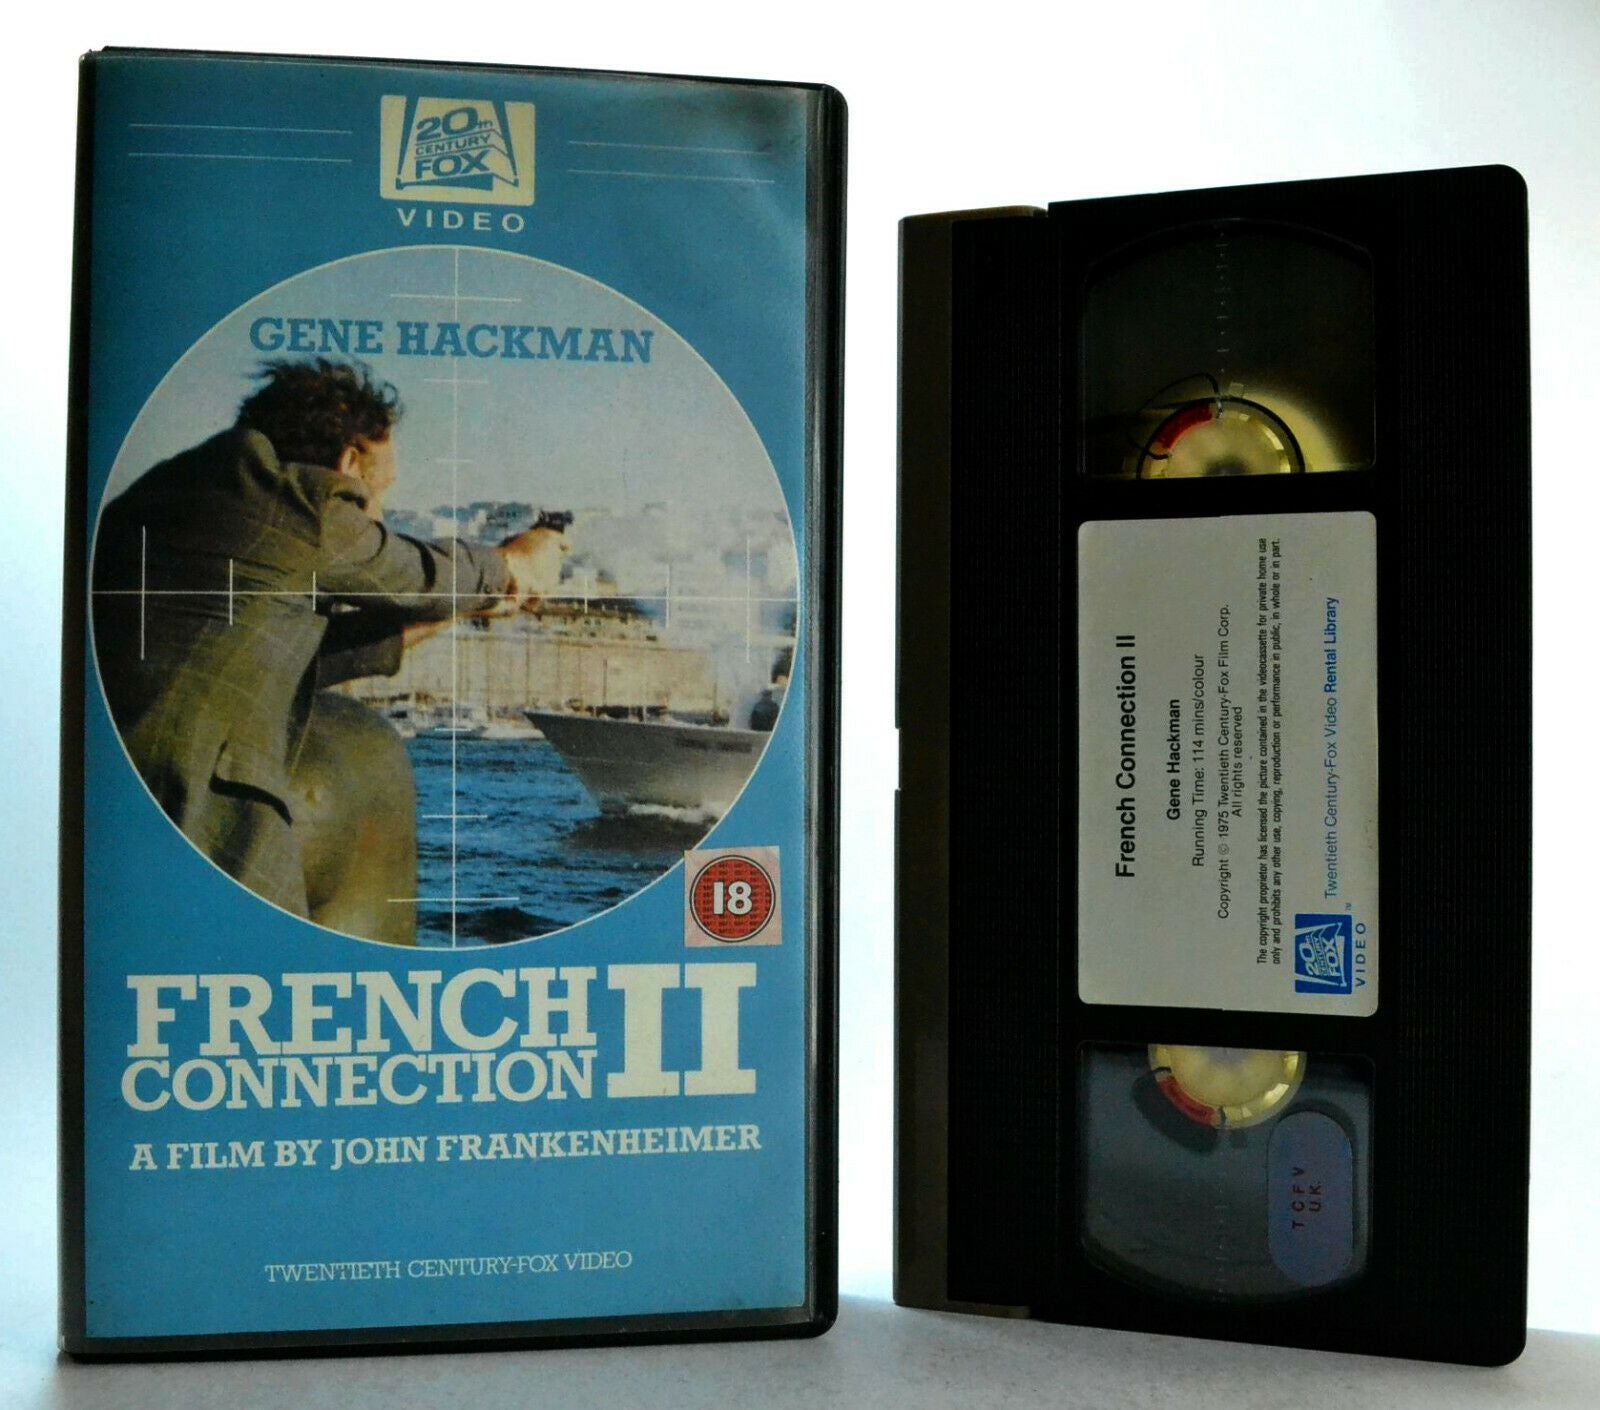 The French Connection 2: (1975) Action Thriller - Gene Hackman - Pre-Cert - VHS-